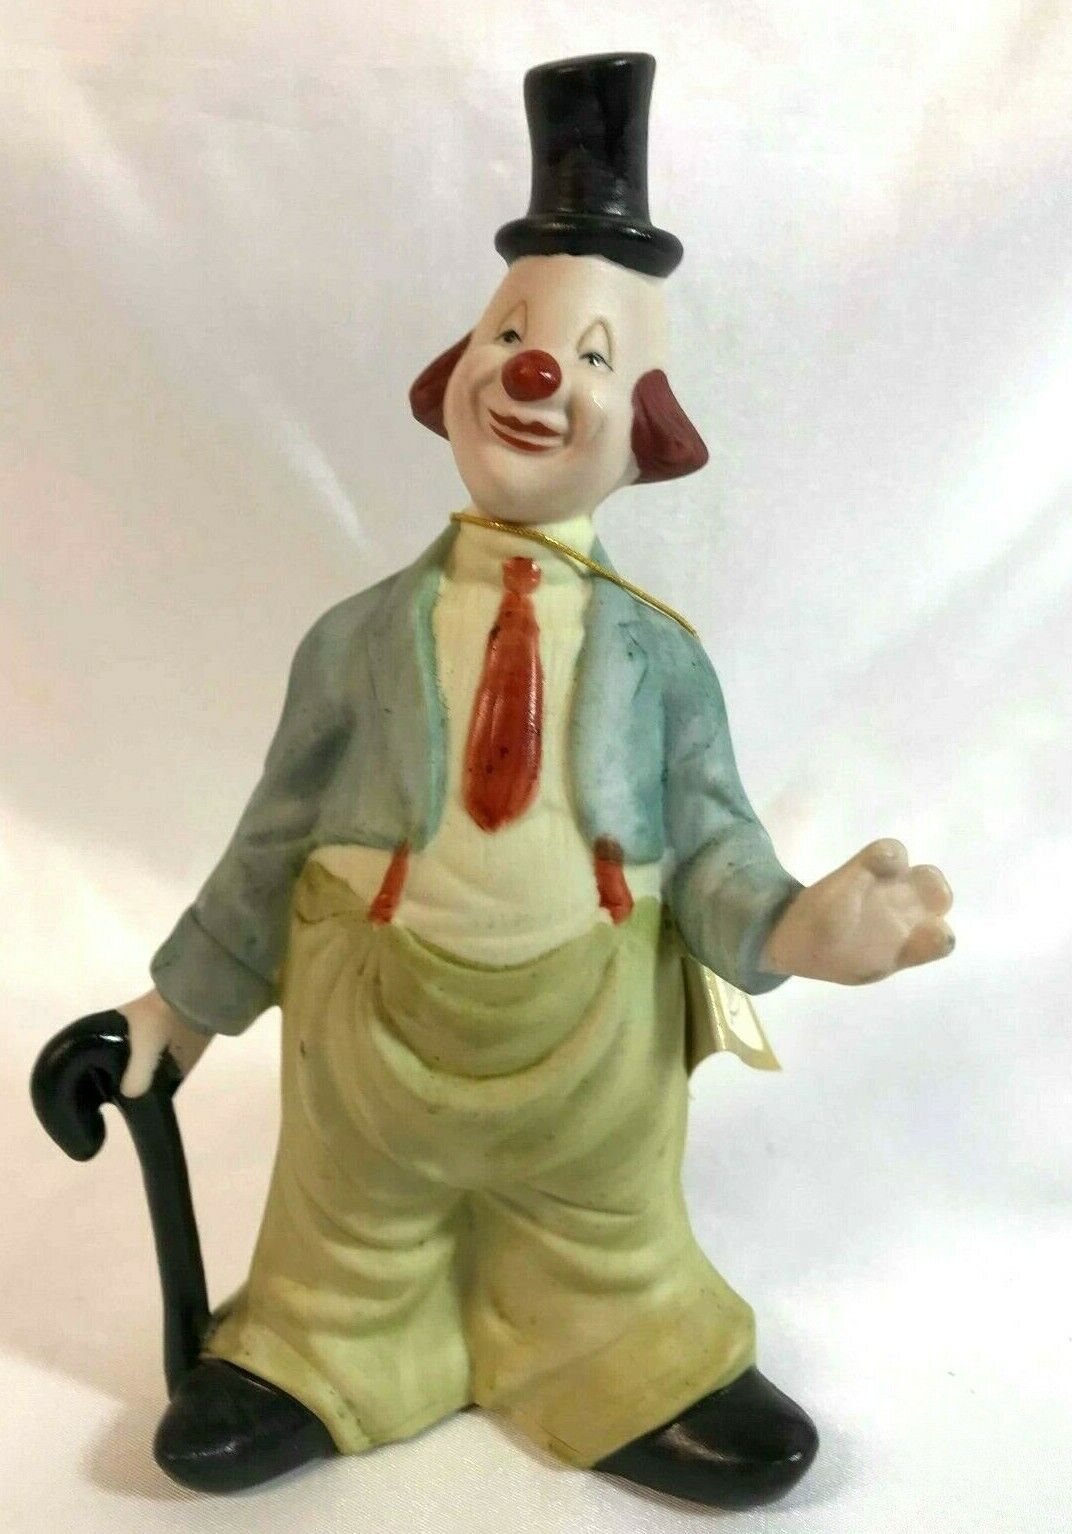 Ceramic Clown by Artistic Gifts Inc 1986, \